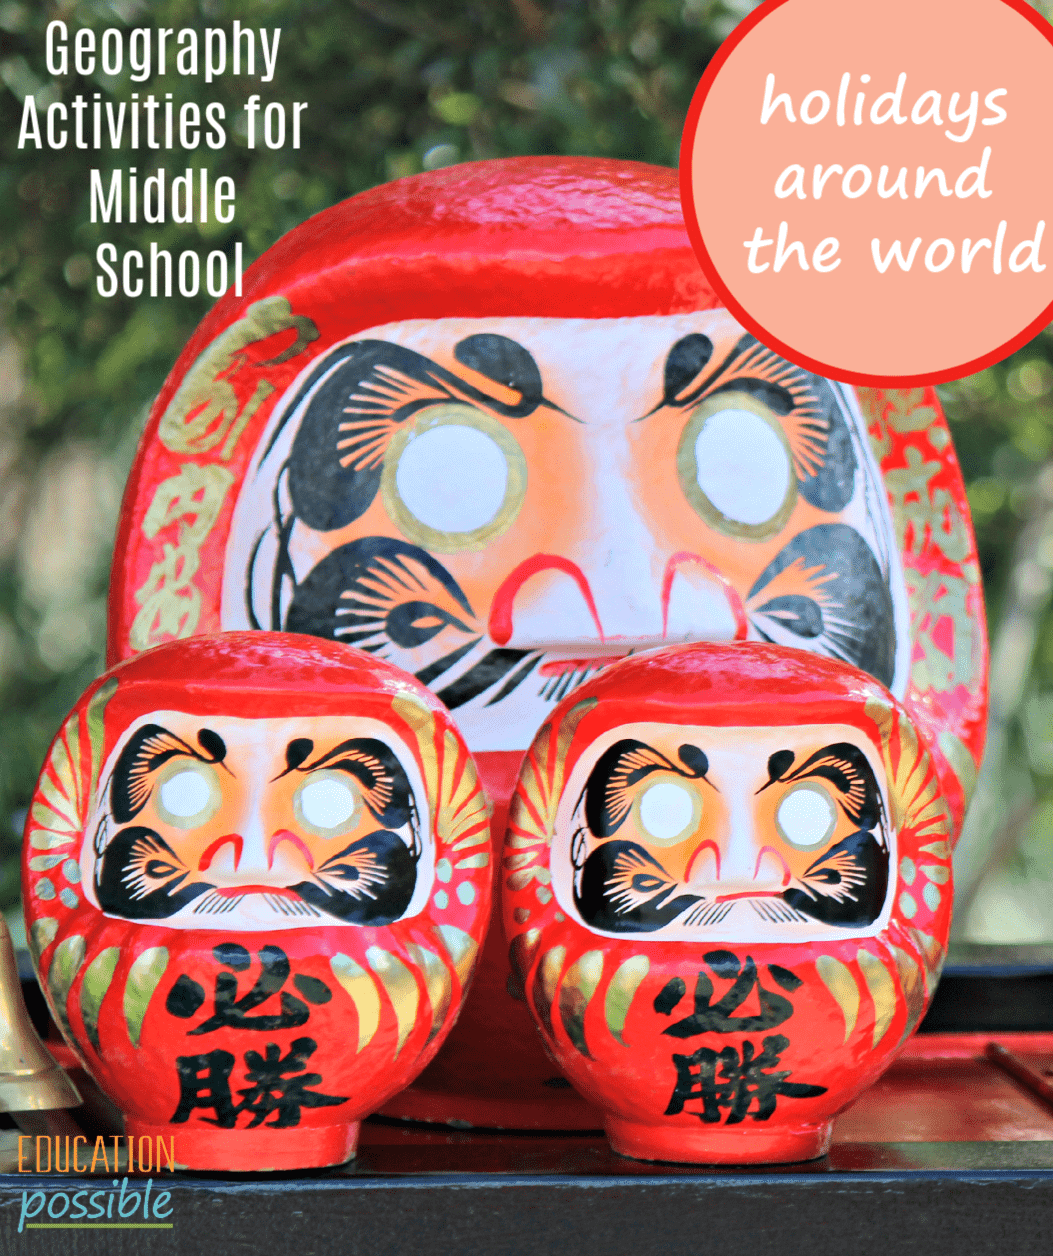 One large and two small daruma dolls.